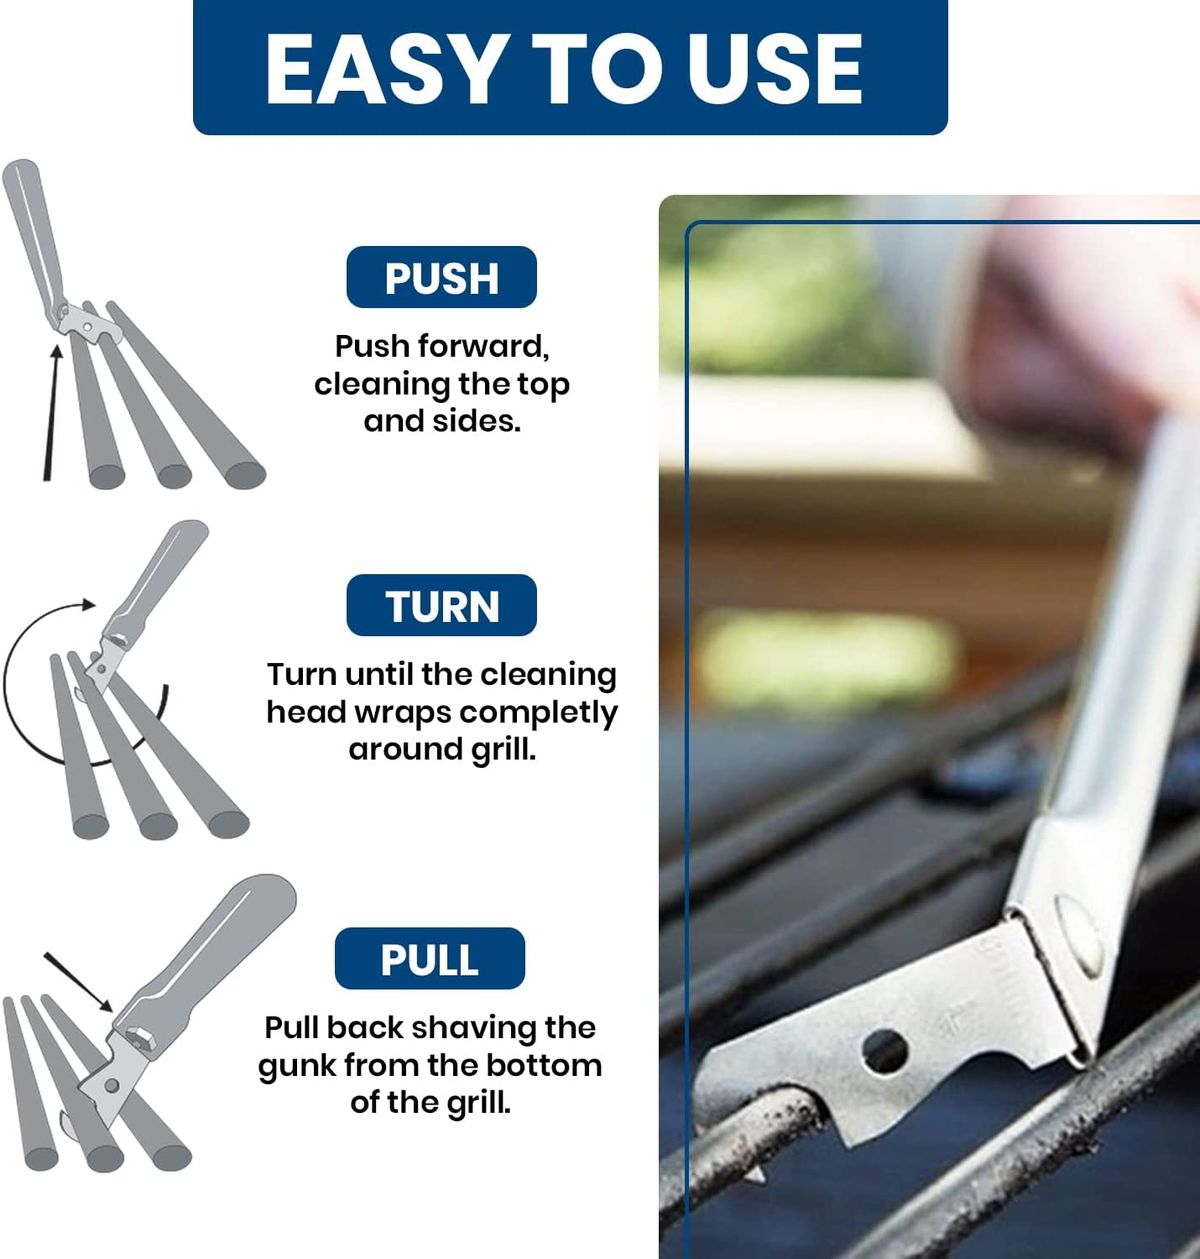 GrillFloss  Ultimate BBQ Grill Cleaning Scraper Tool Cleans